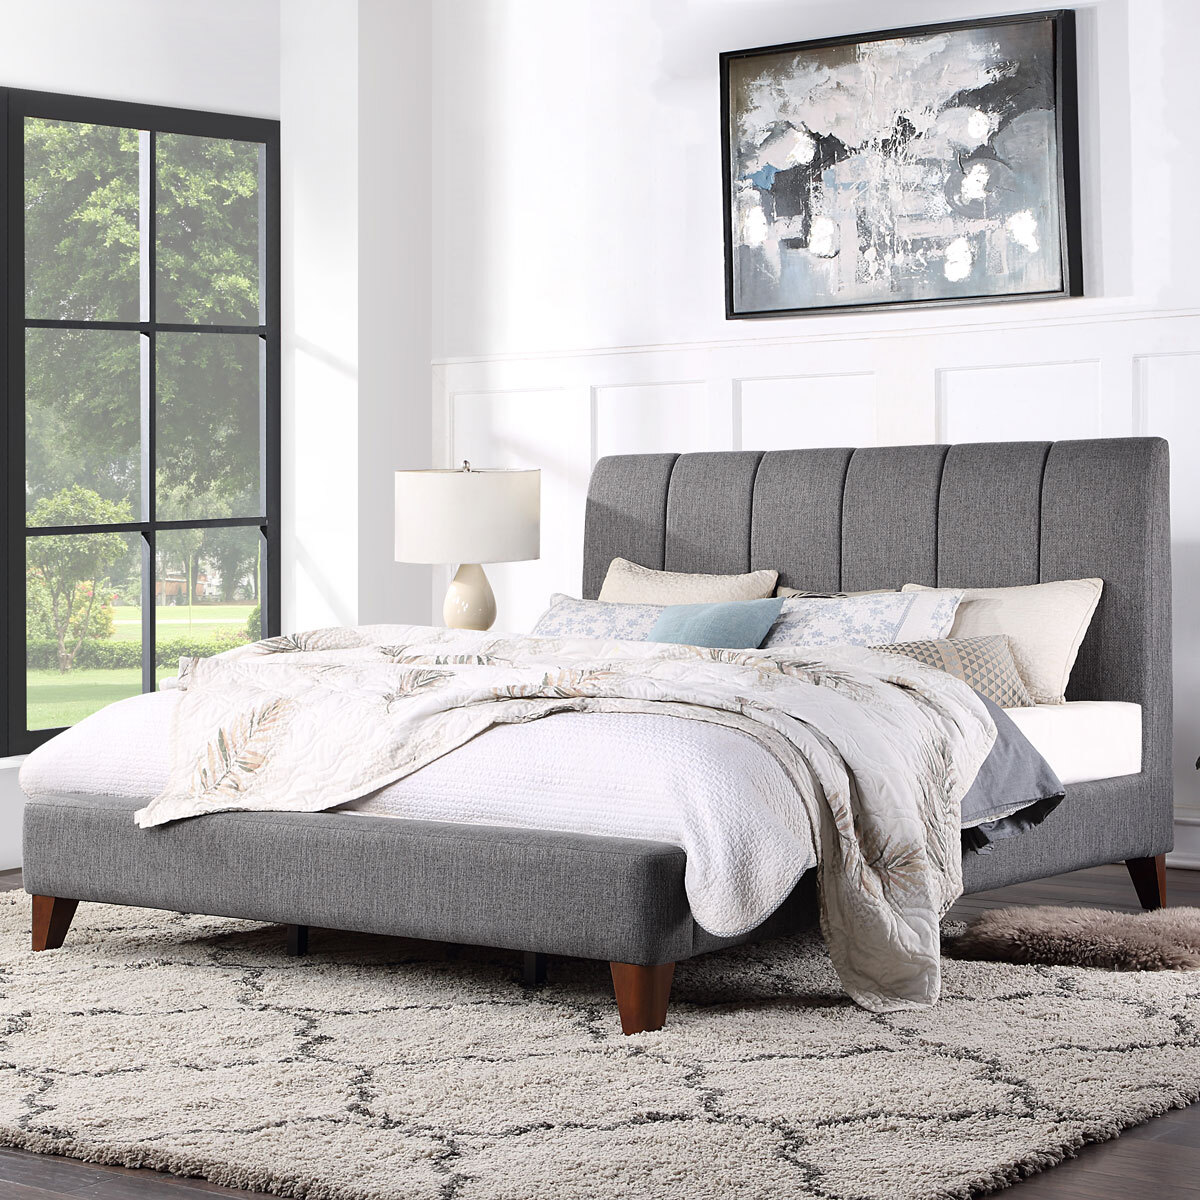 Northridge Home Grey Upholstered Bed, Grey Tufted Headboard King Size Bed